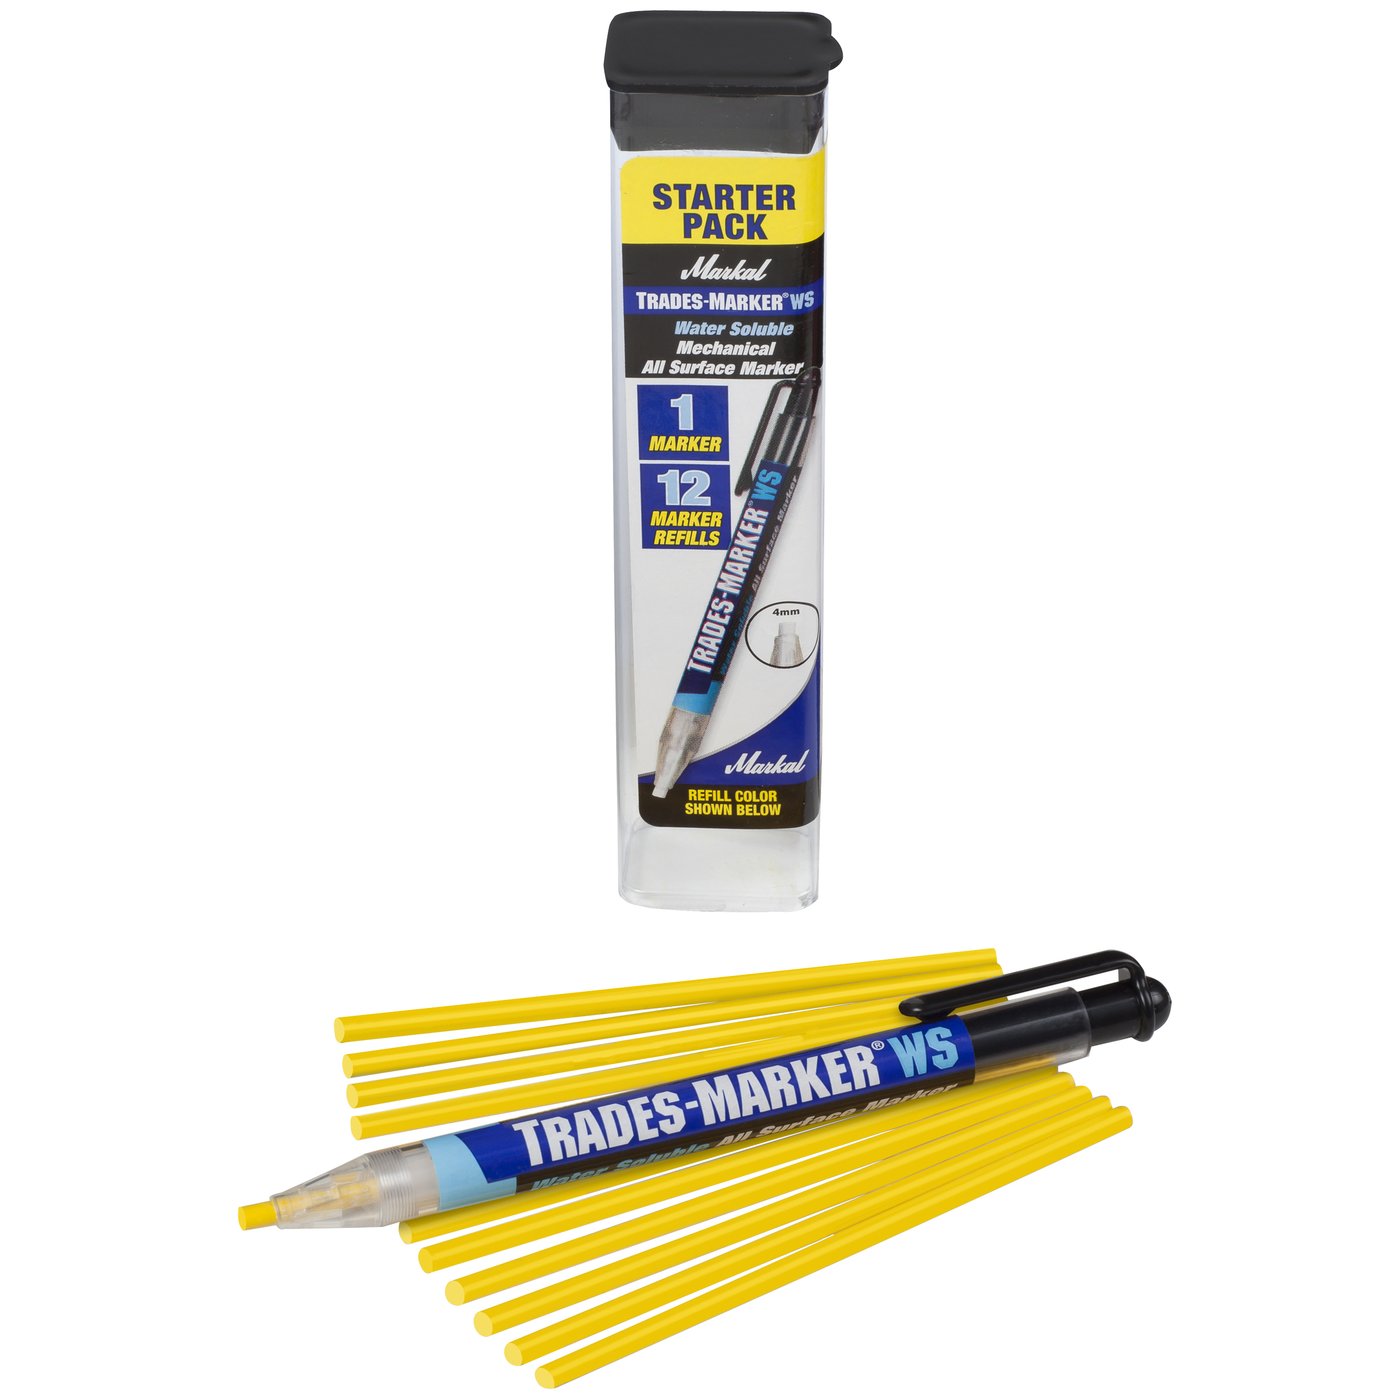 Markal 96191 Trades-Marker WS Starter Pack Yellow Mechanical All Surface Marker